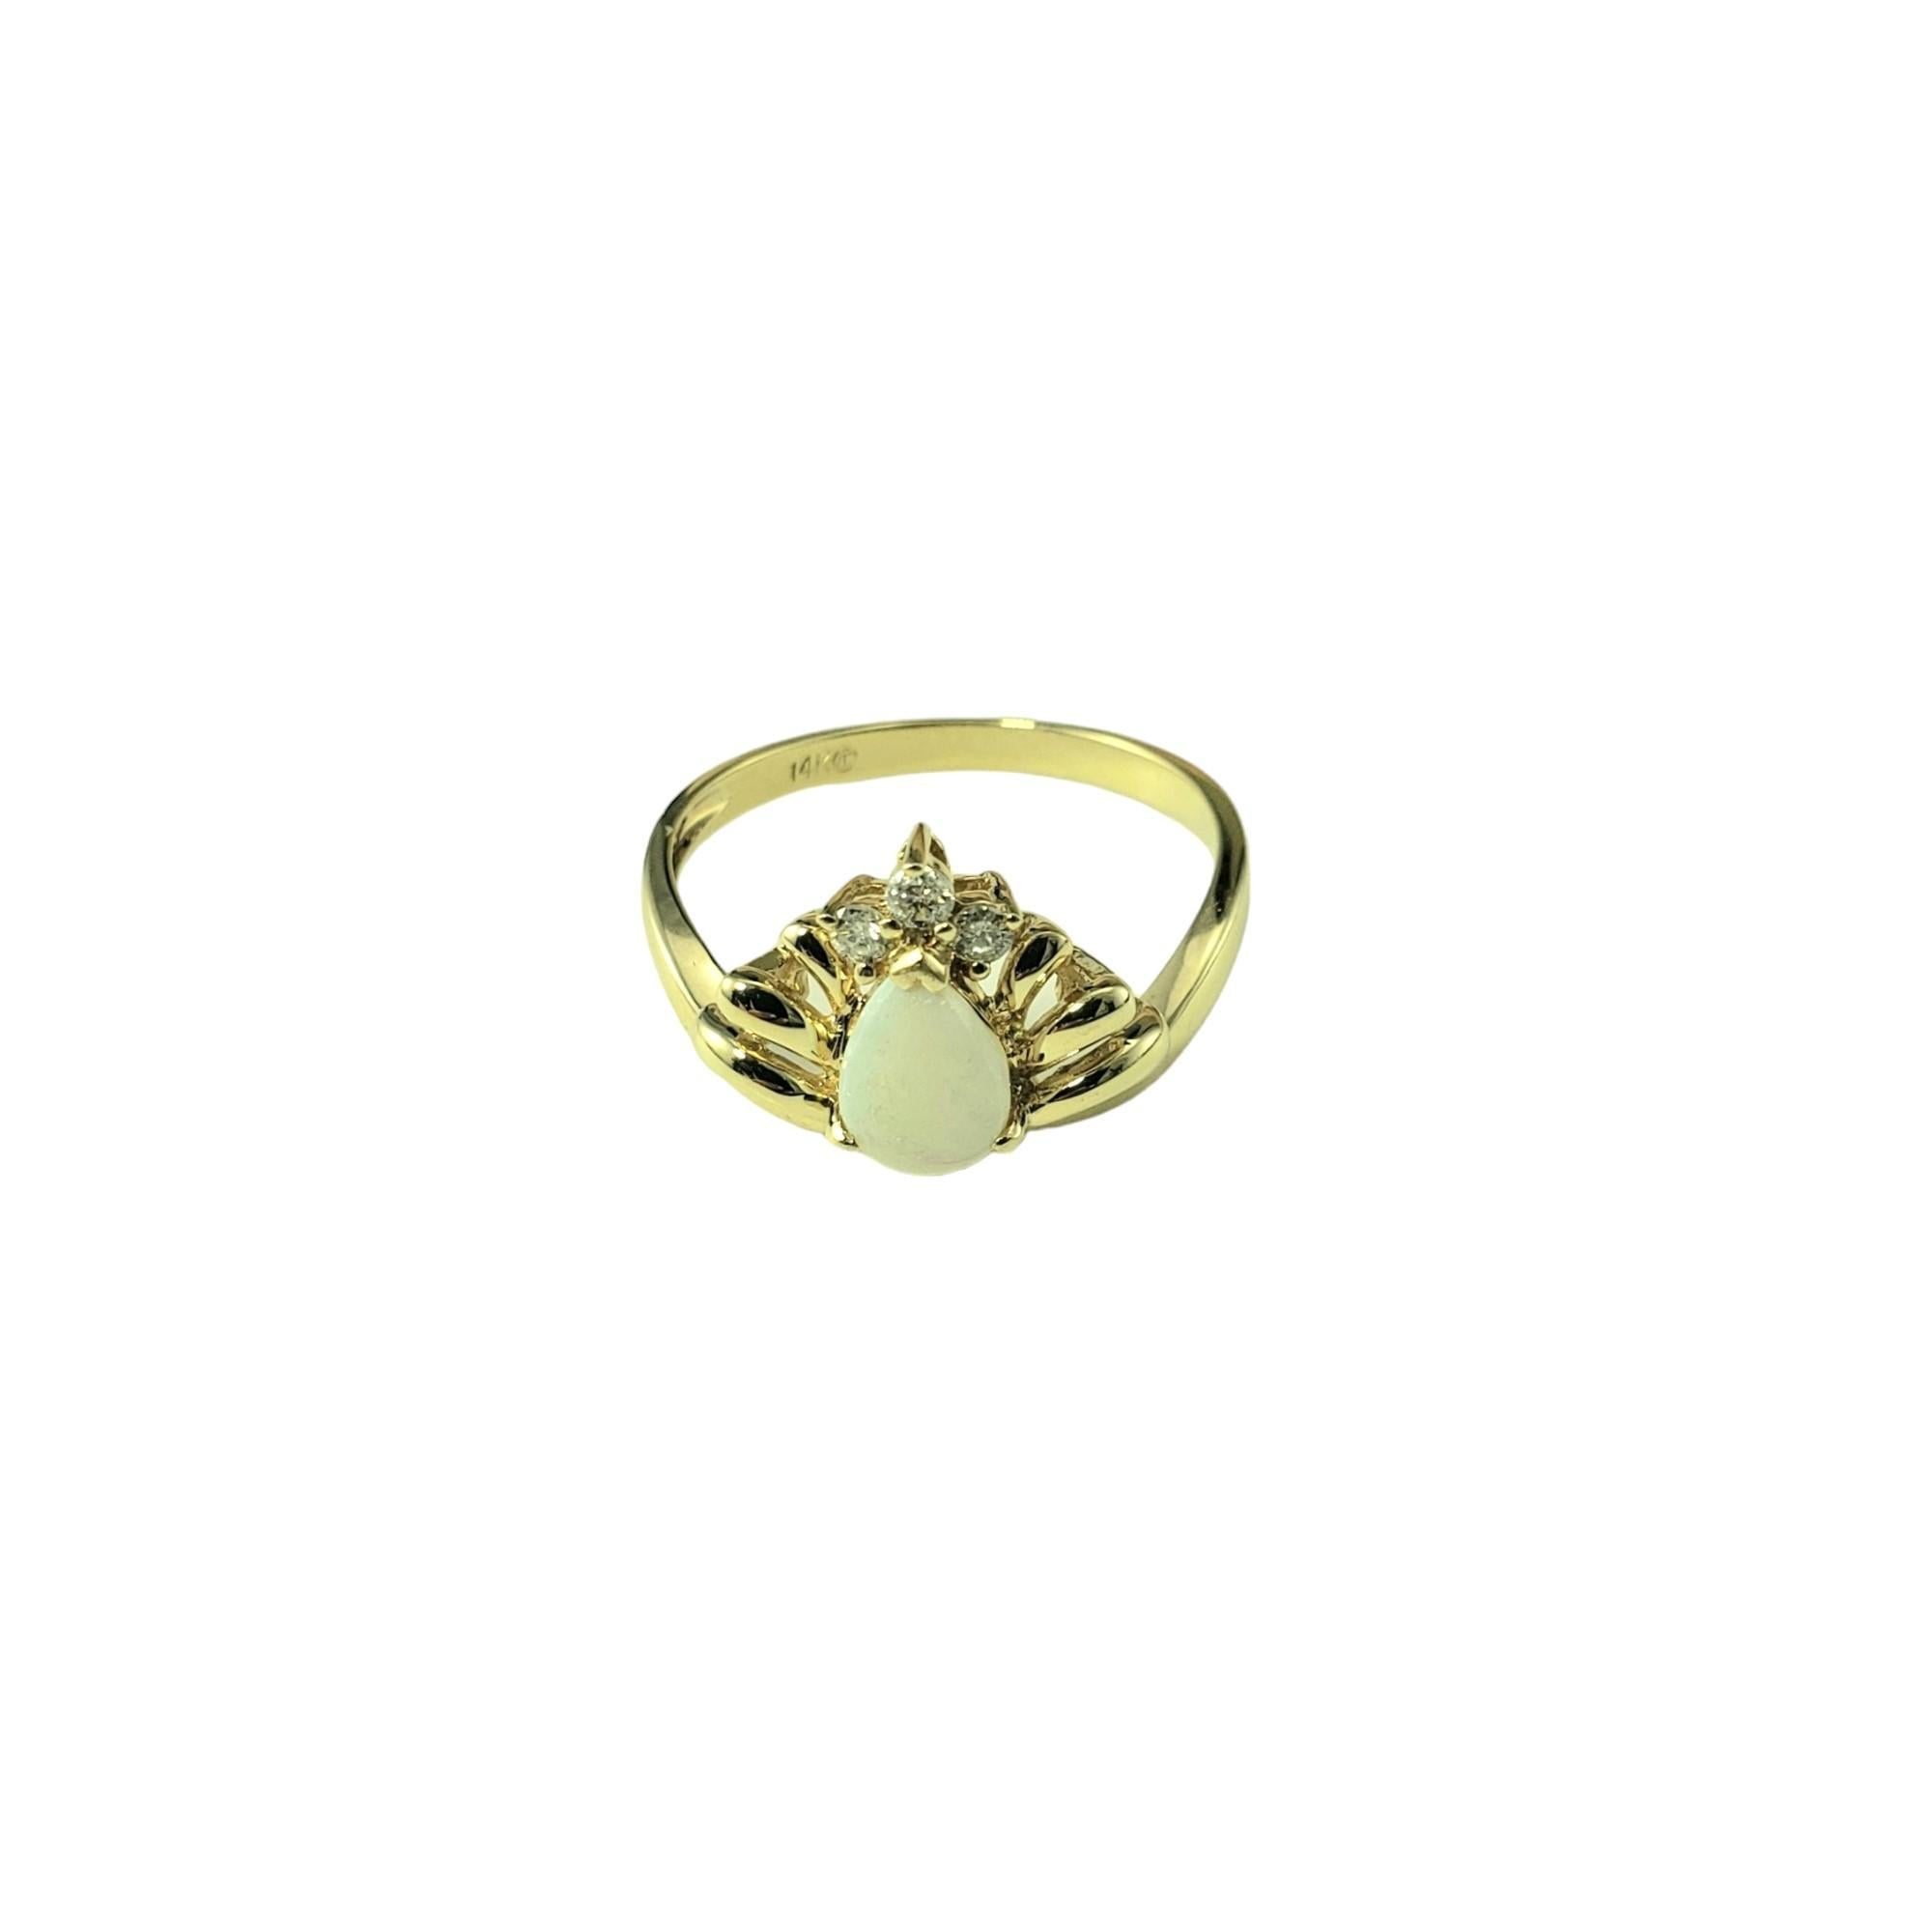 14 Karat Yellow Gold Opal and Diamond Ring Size 6.75

This elegant ring features one pear shaped opal (7 mm x 5 mm) and three round brilliant cut diamonds set in classic 14K yellow gold.  

Width: 12 mm.  Shank: 2 mm.

Approximate total diamond